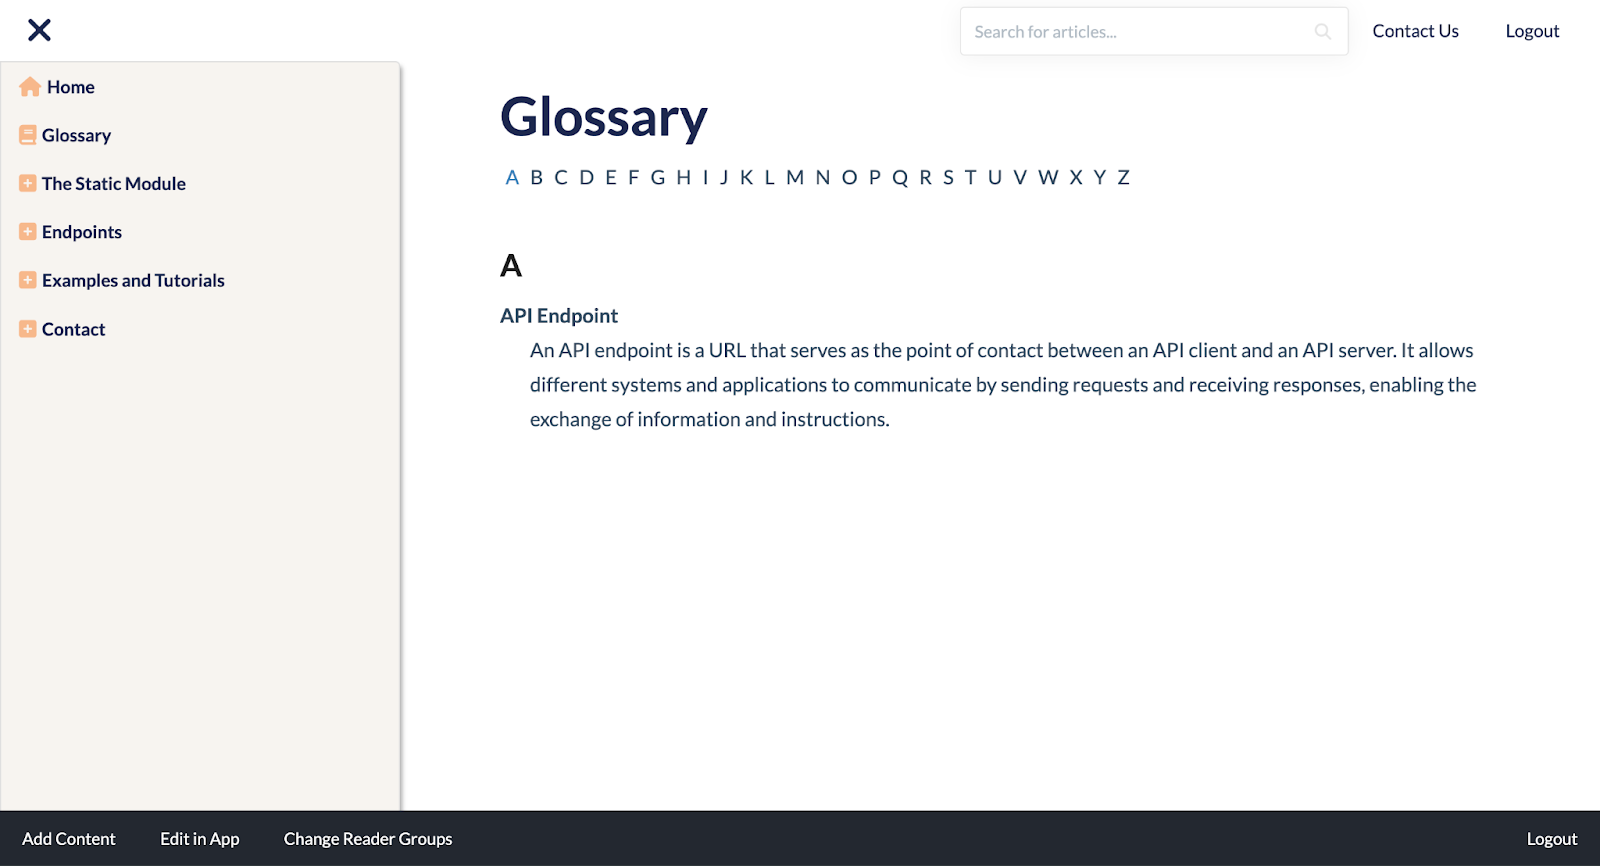 A screenshot of the Glossary in a knowledge base that was created with KnowledgeOwl.